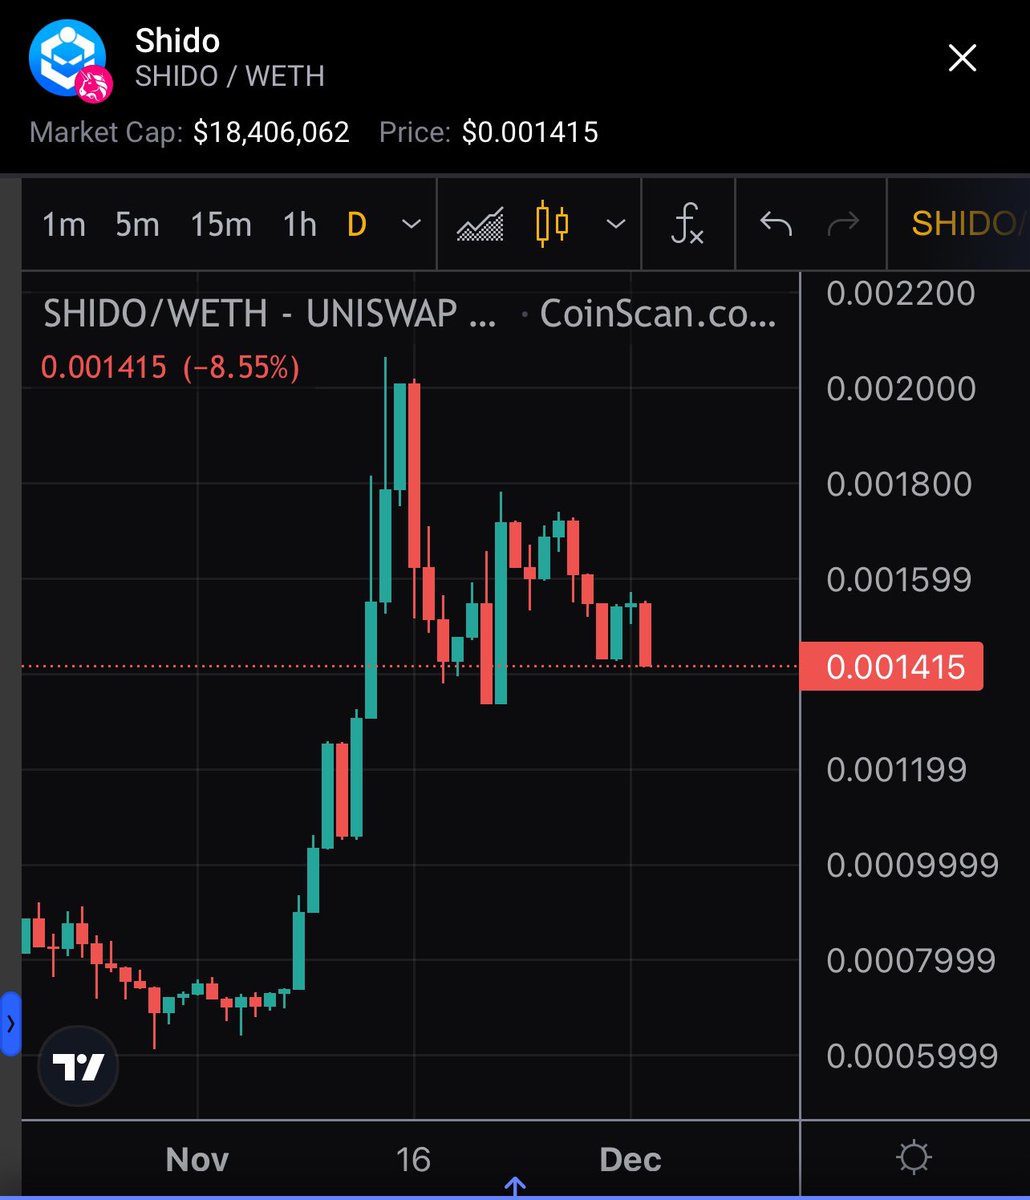 GM 🥷 $SHIDO
Hey @ShidoGlobal , are you ready for what’s coming? 👀

#Crypto #Web3 #BlockchainEvent